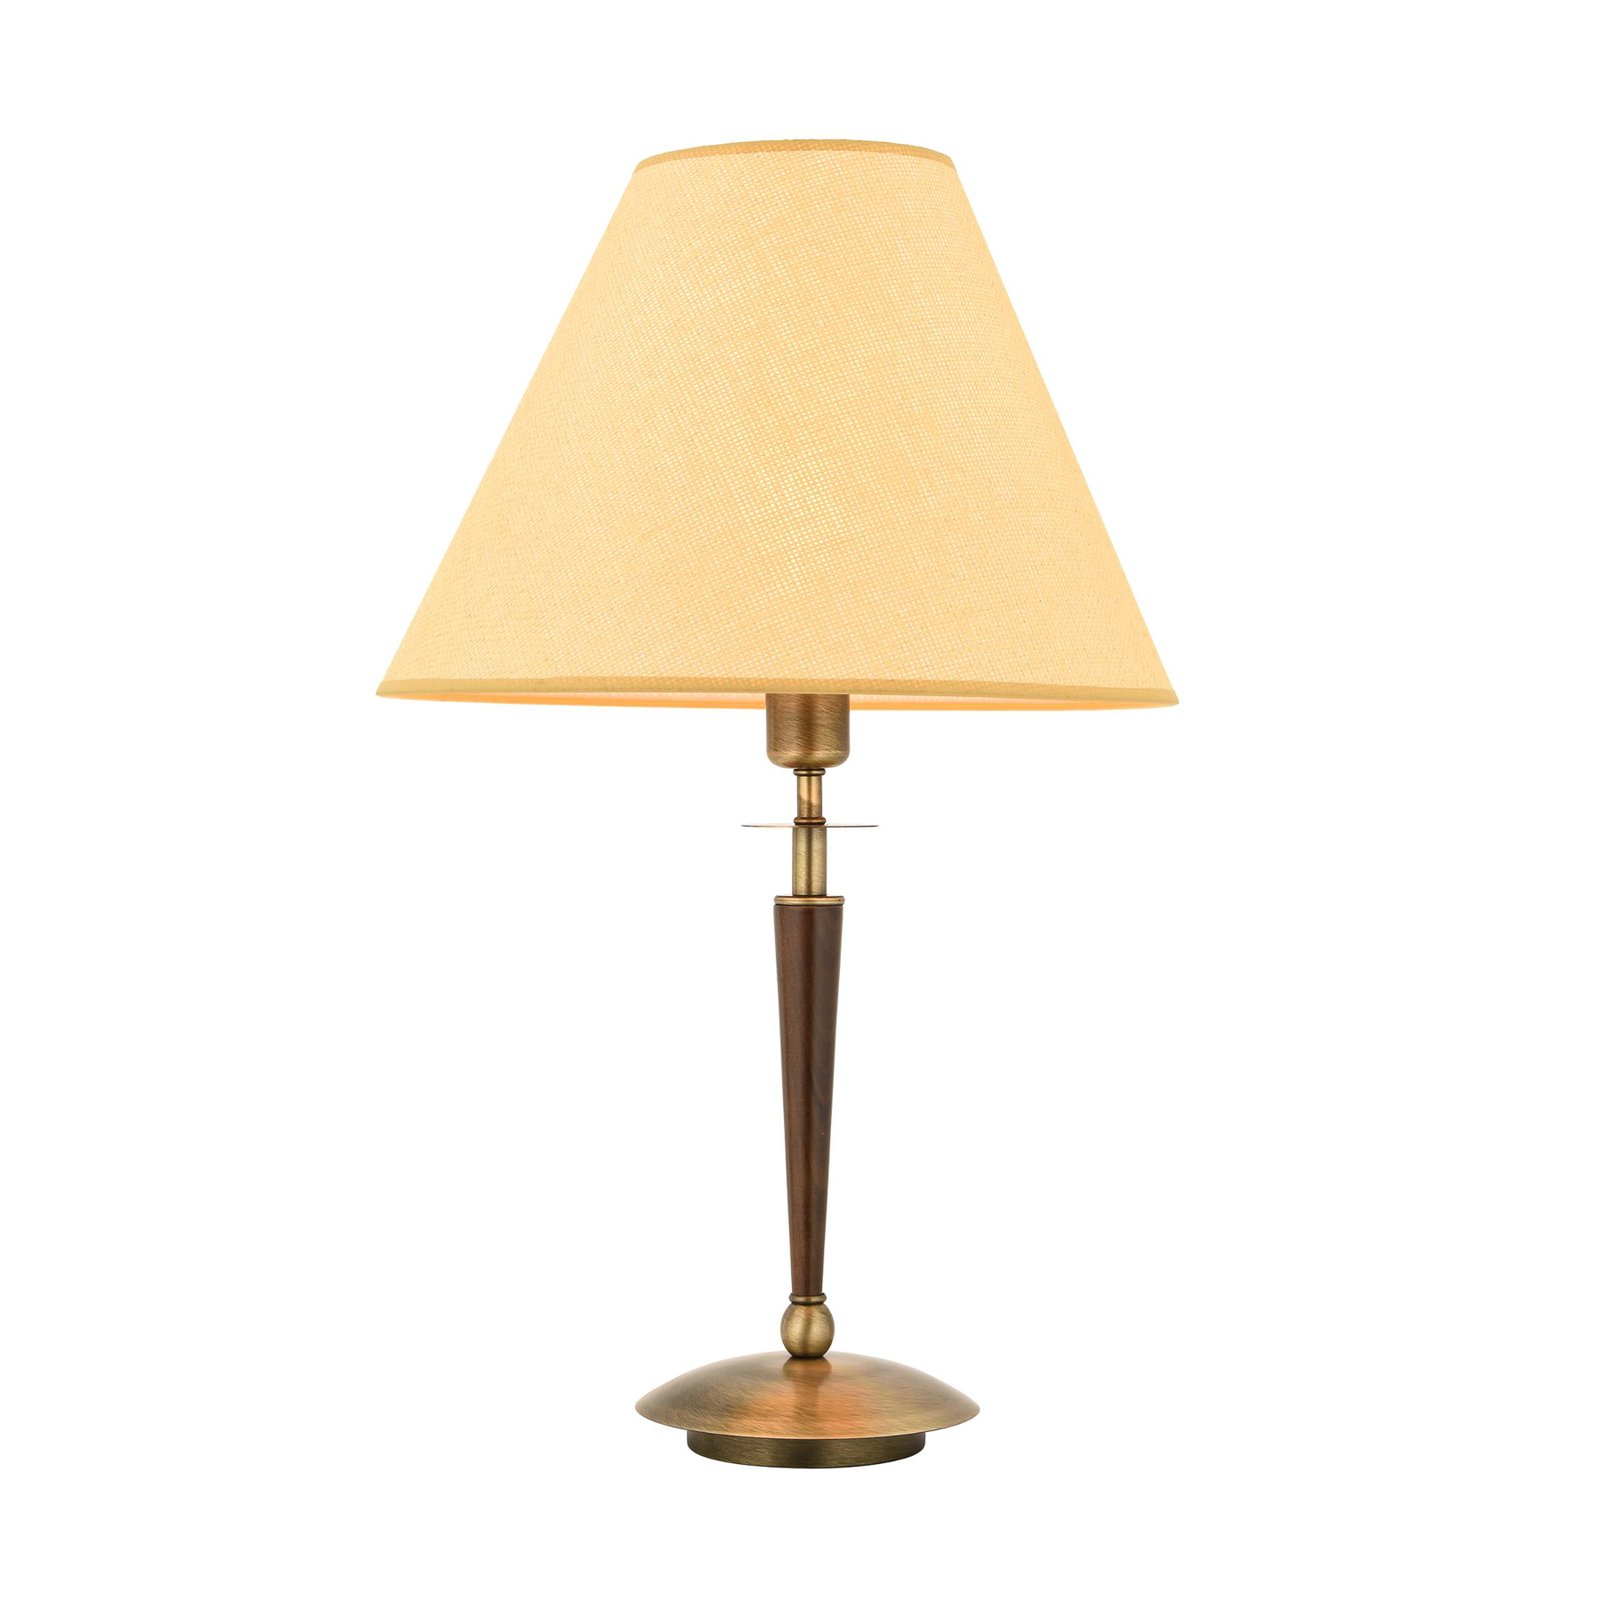 HML-9009-1EB table lamp, fabric lampshade